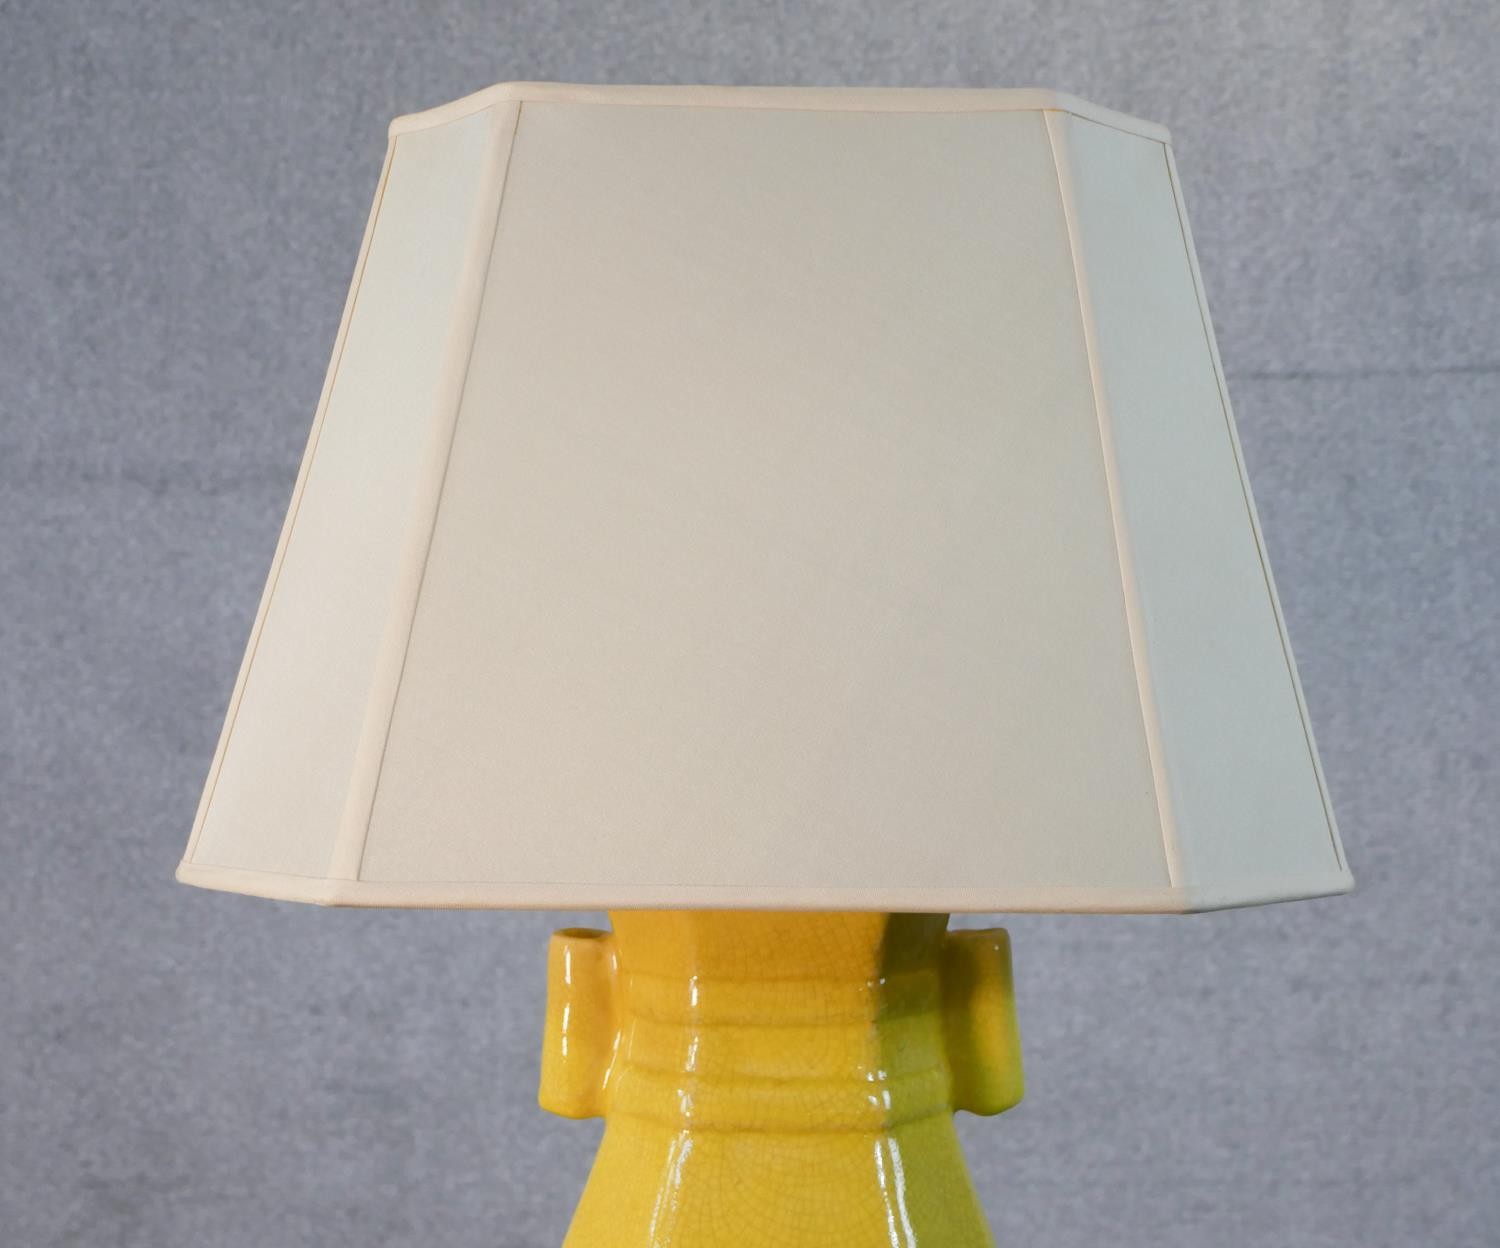 A Chinese yellow glaze vase design table lamp with cream shade. H.61 W.40cm - Image 4 of 6